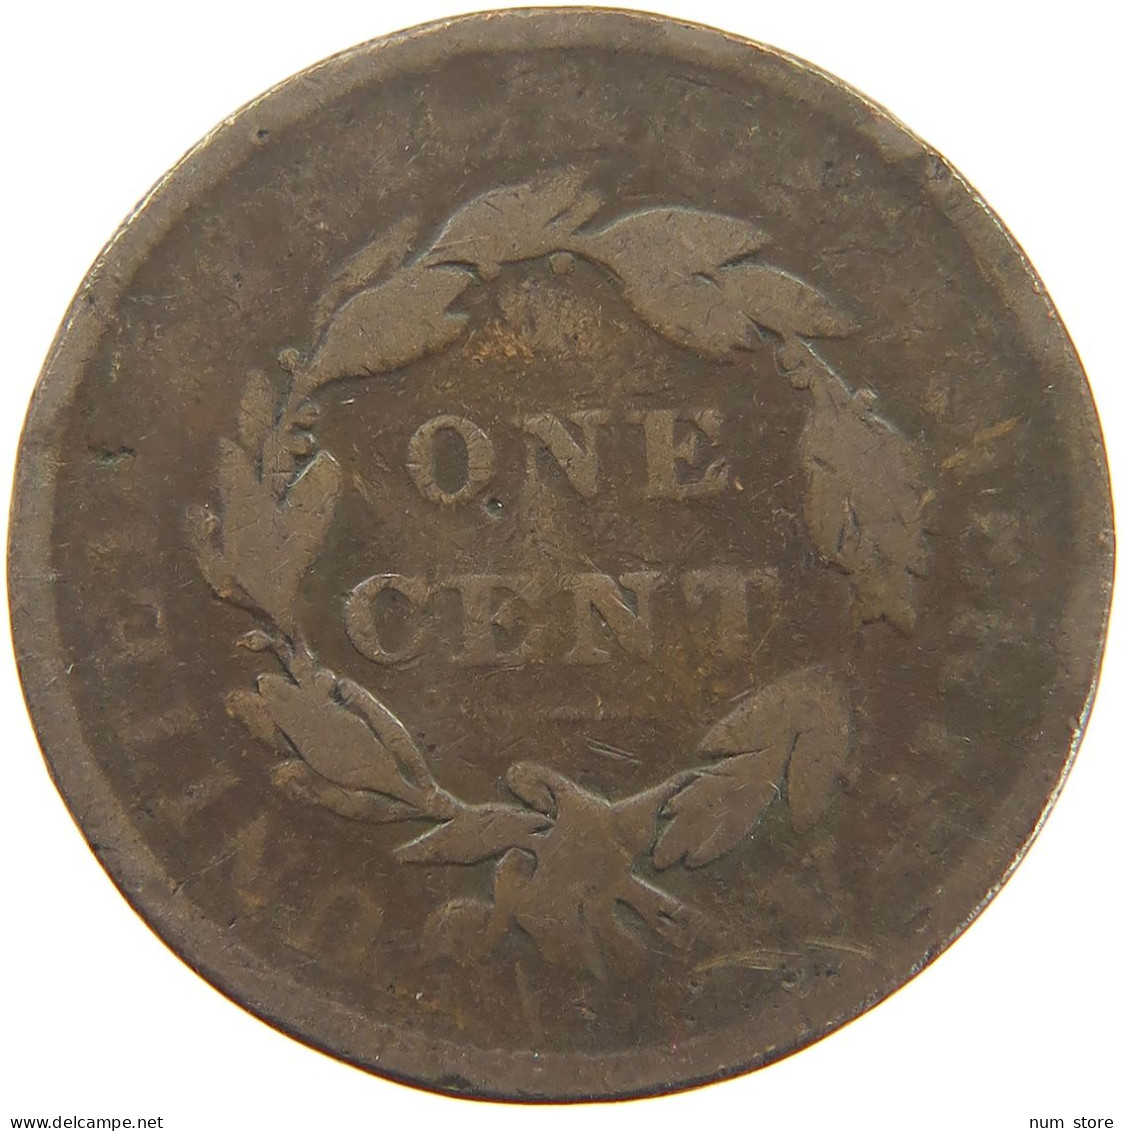 UNITED STATES OF AMERICA LARGE CENT 1837 Coronet Head #a041 0427 - 1816-1839: Coronet Head